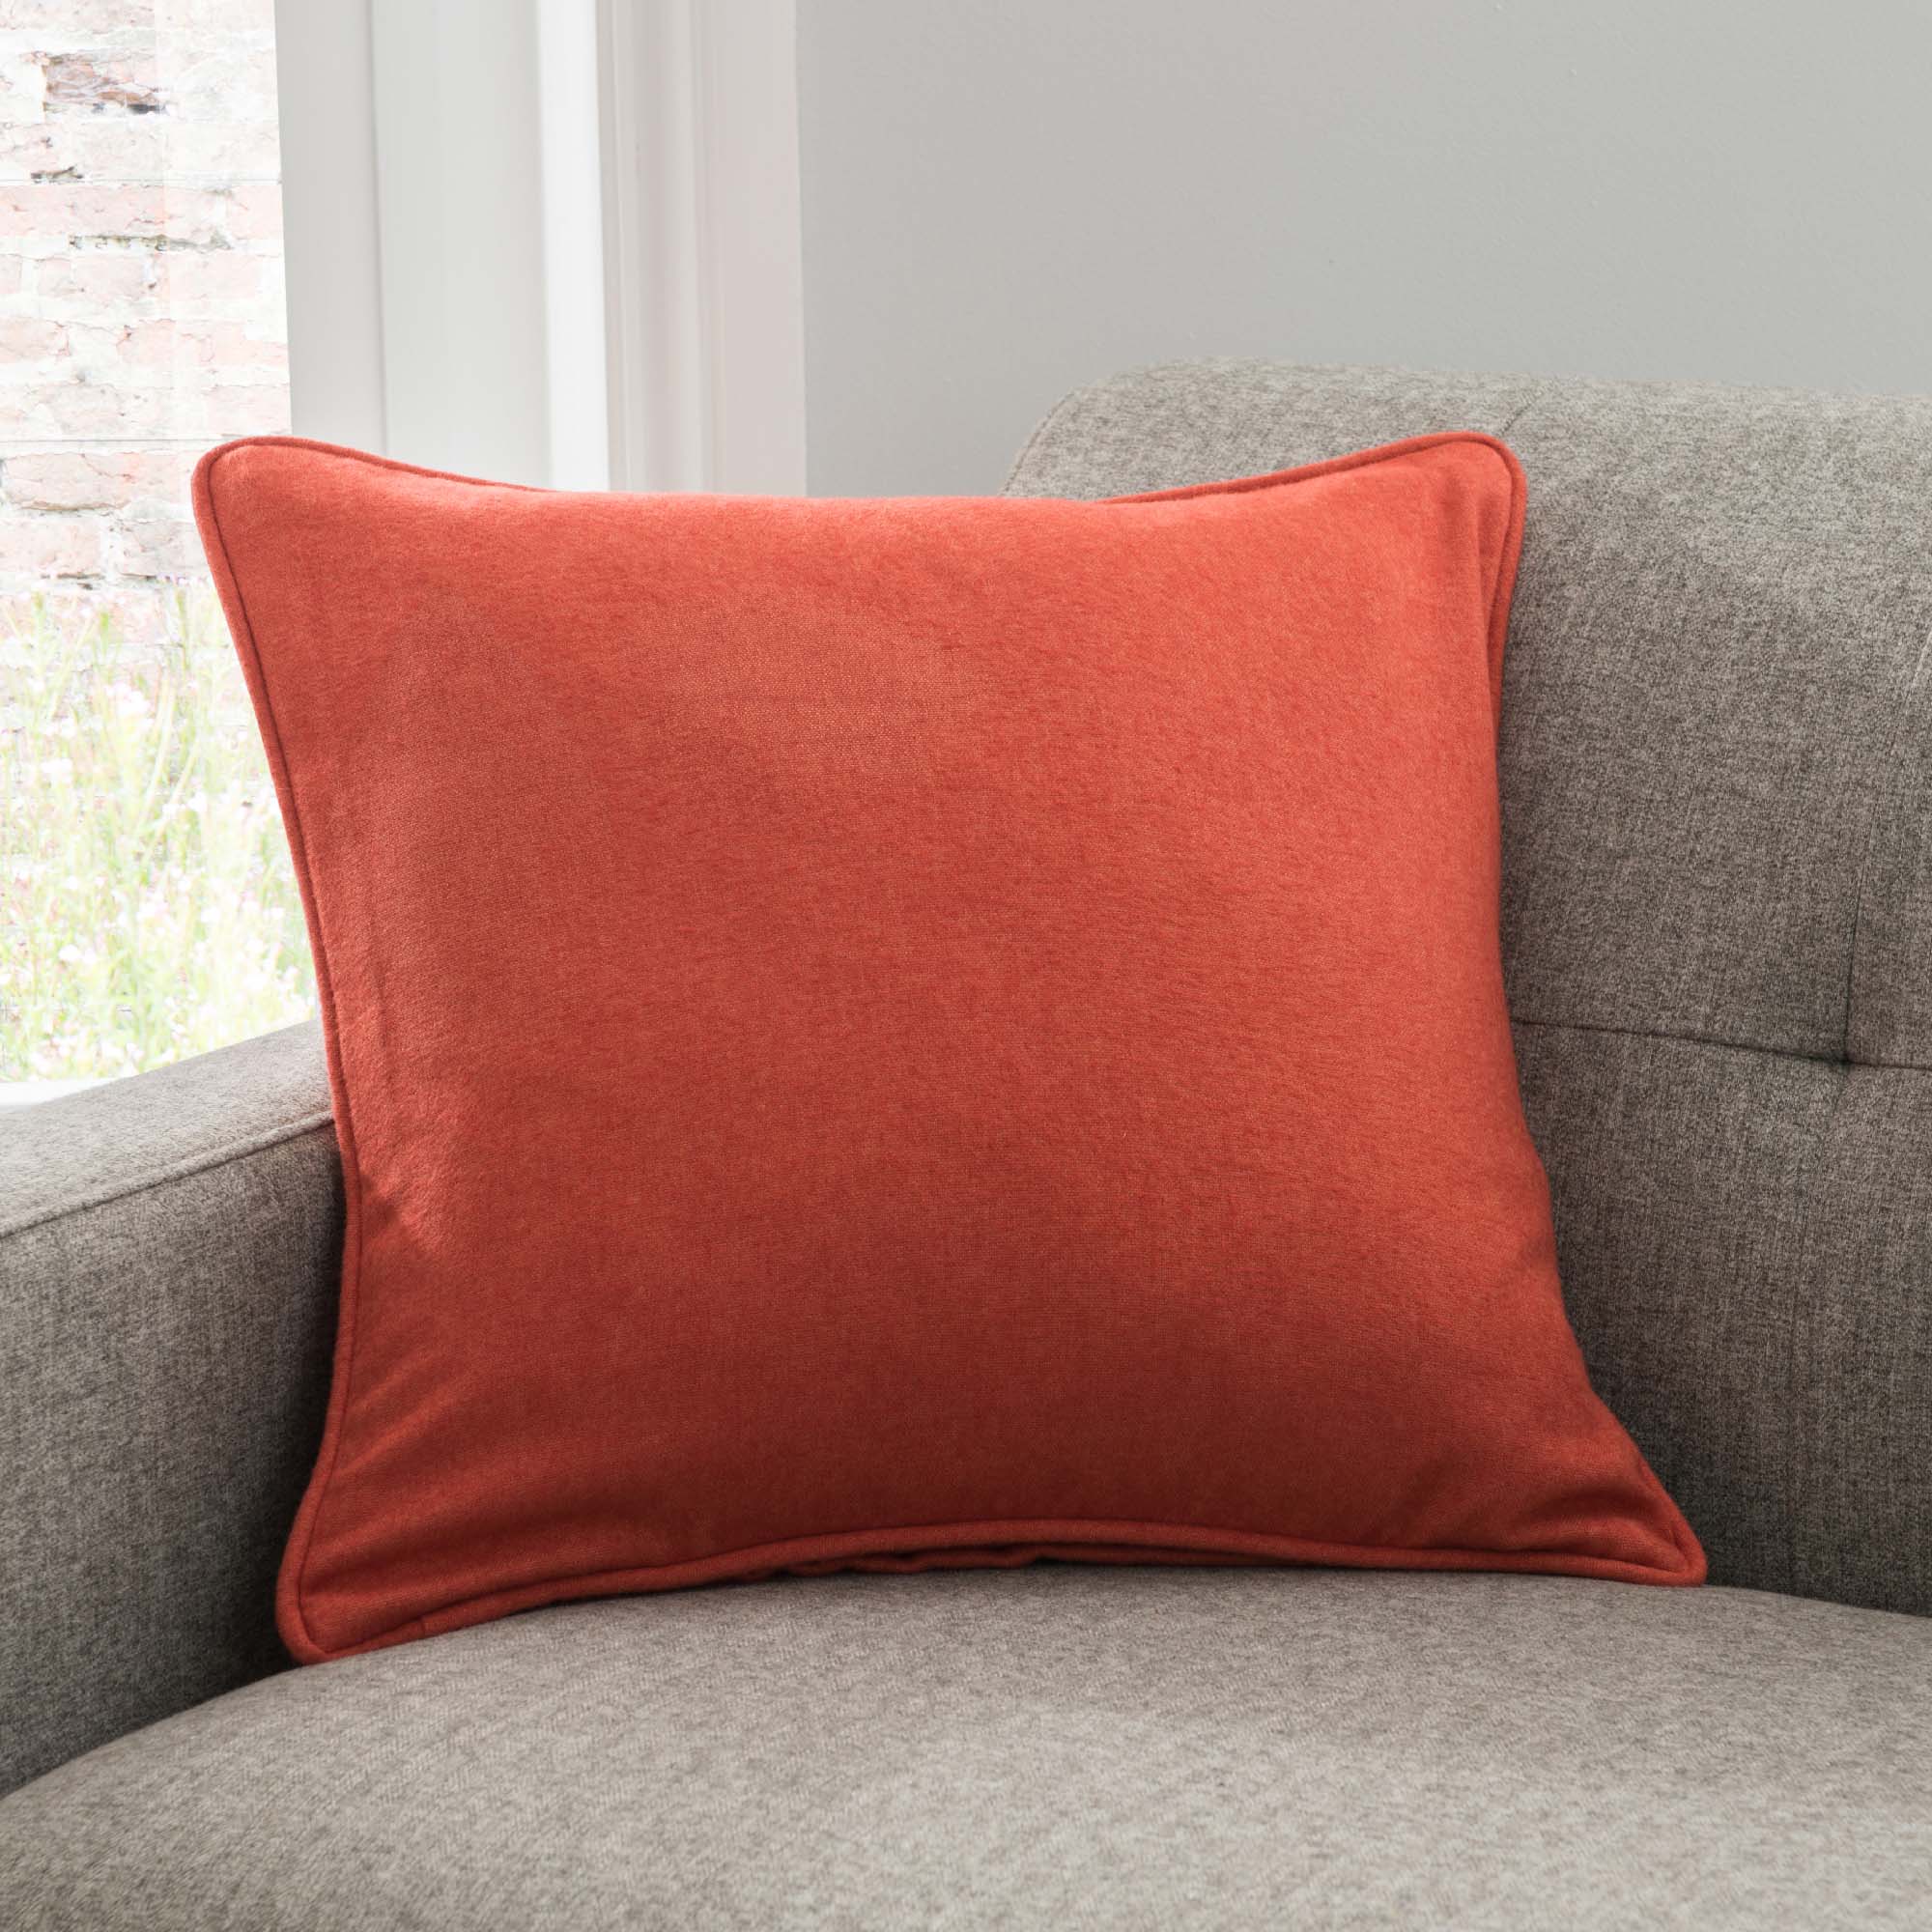 Cushion Covers | Living Room & Bedroom Cushion Covers | Dunelm - Page 3